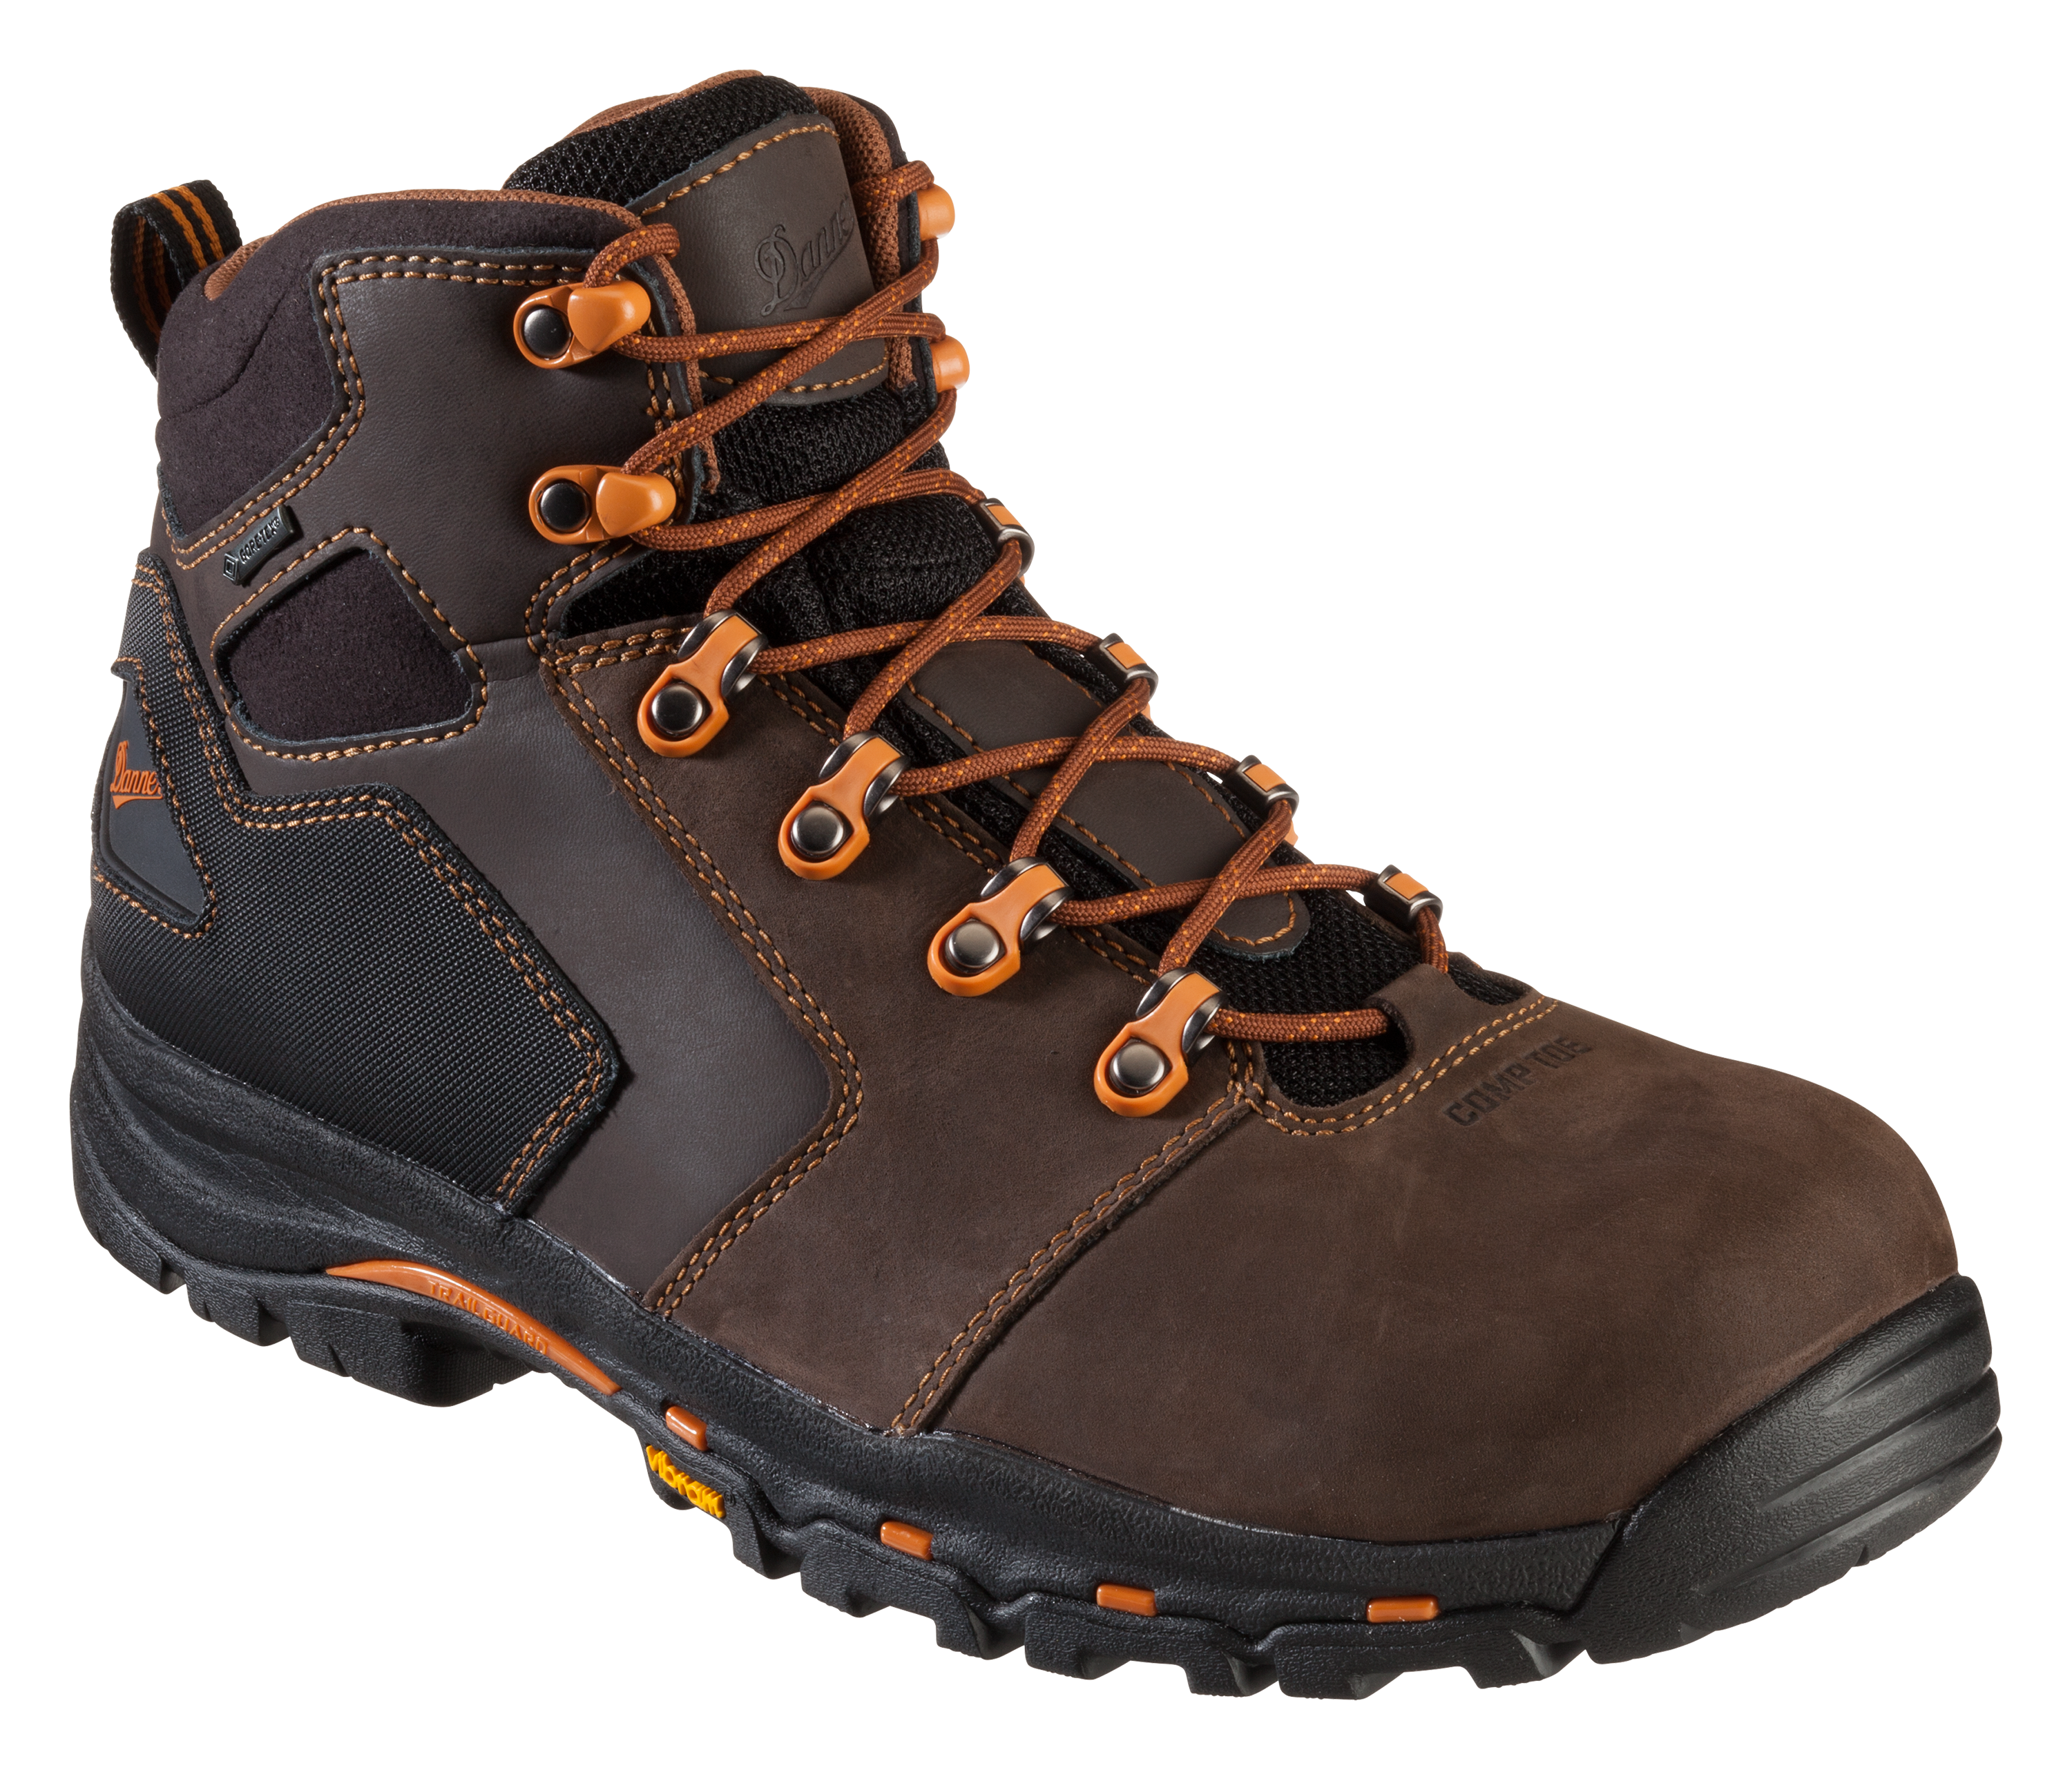 Danner Vicious GORE-TEX Non-Metallic Safety Toe Work Boots for Men - Brown - 11.5M